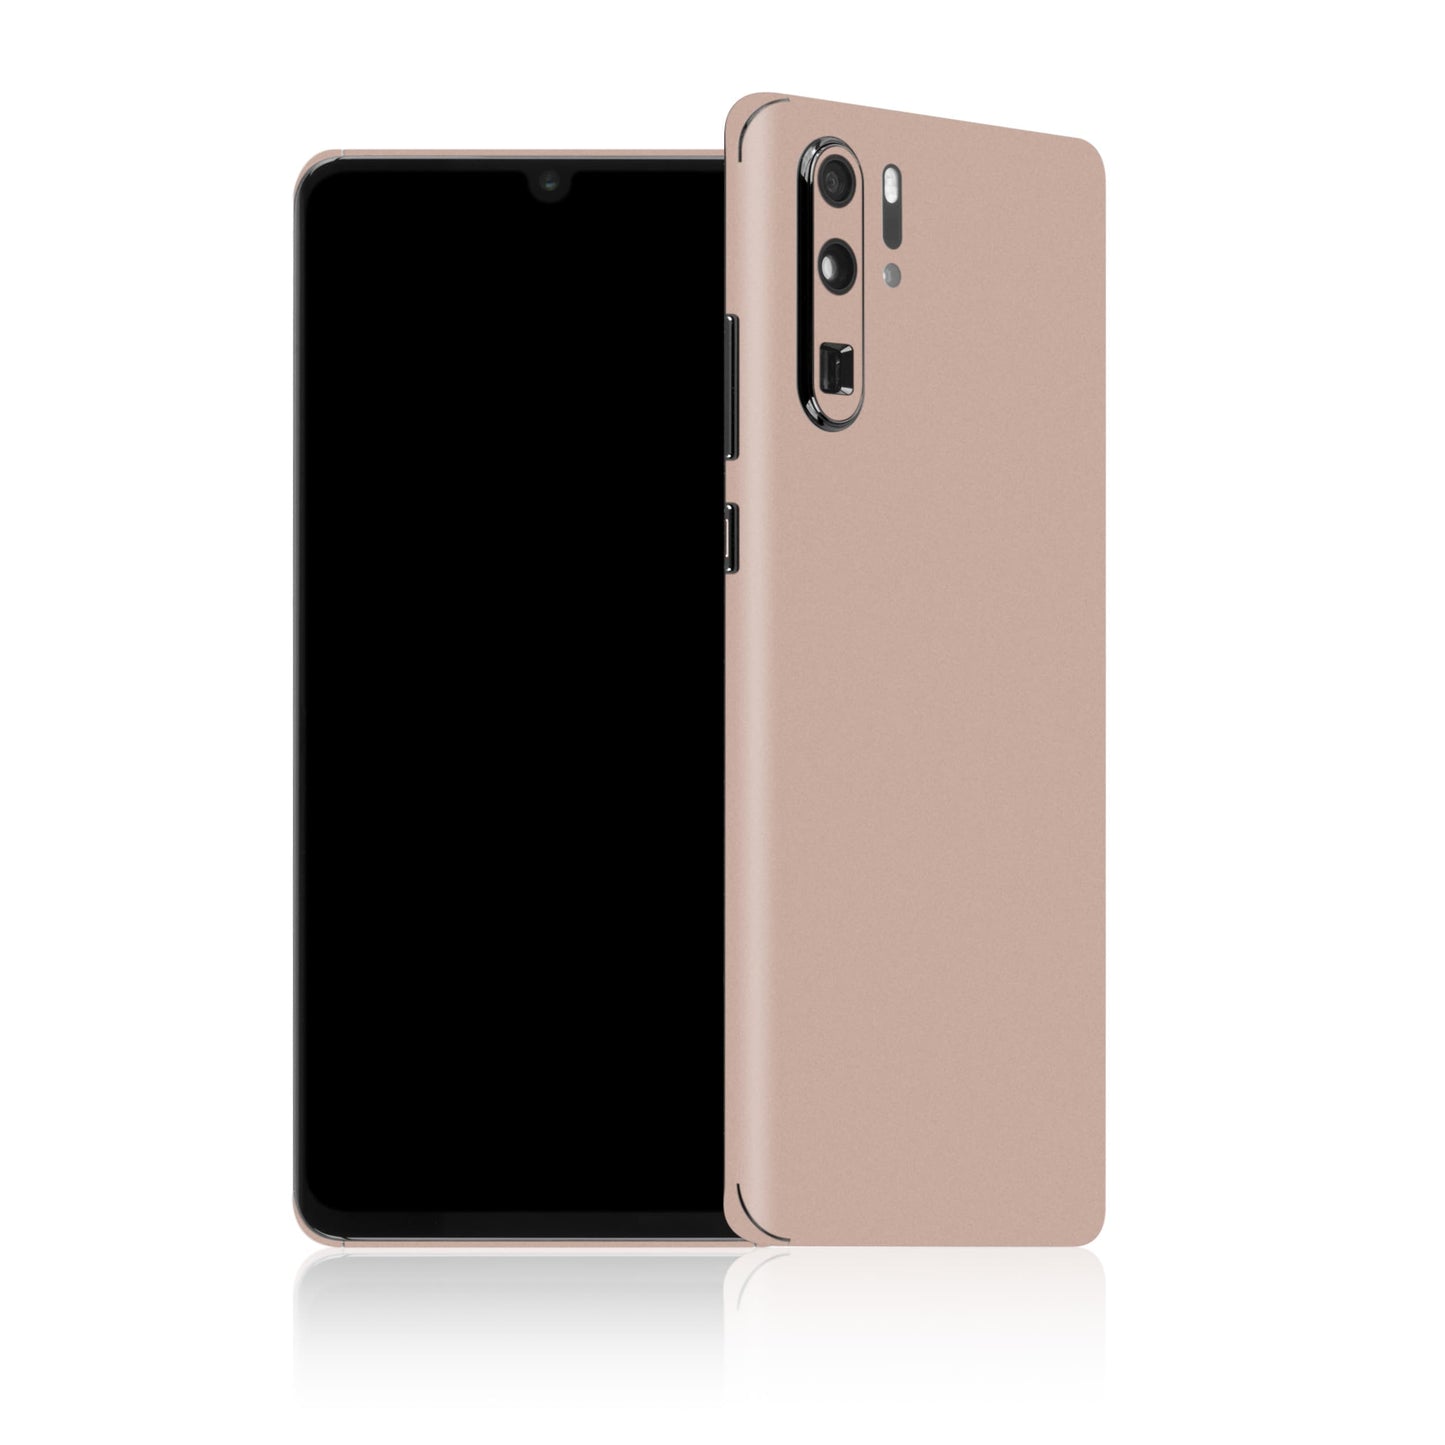 Huawei P30 Pro - Color Edition